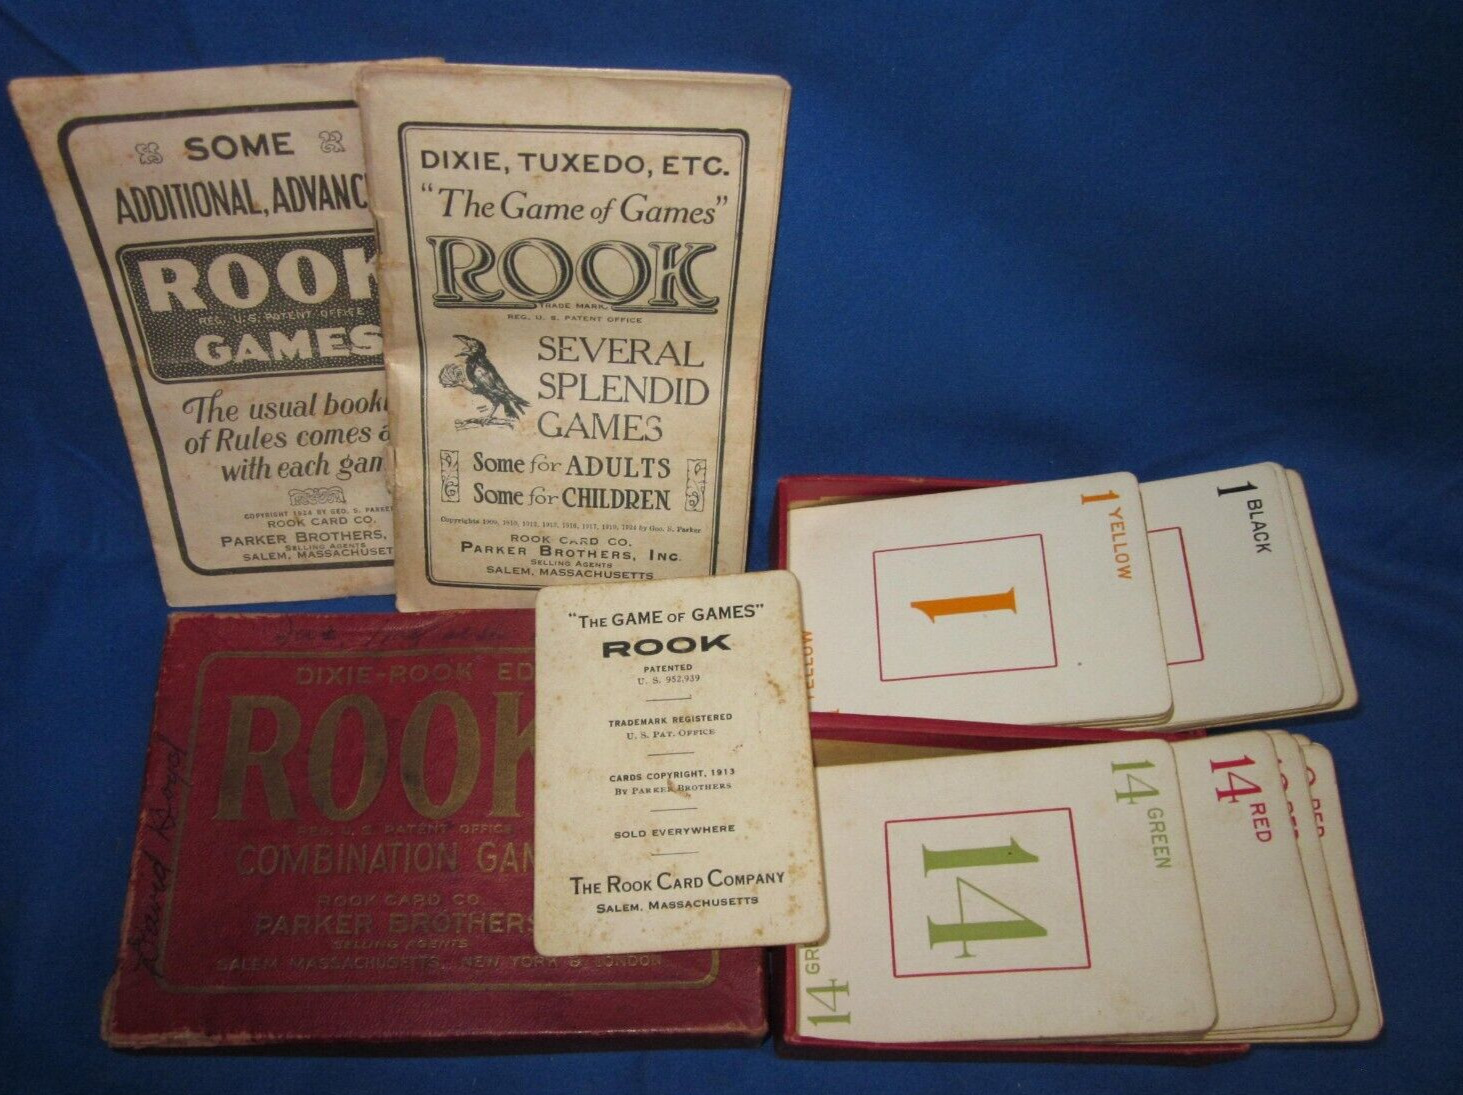 an old deck of ROOK Cards